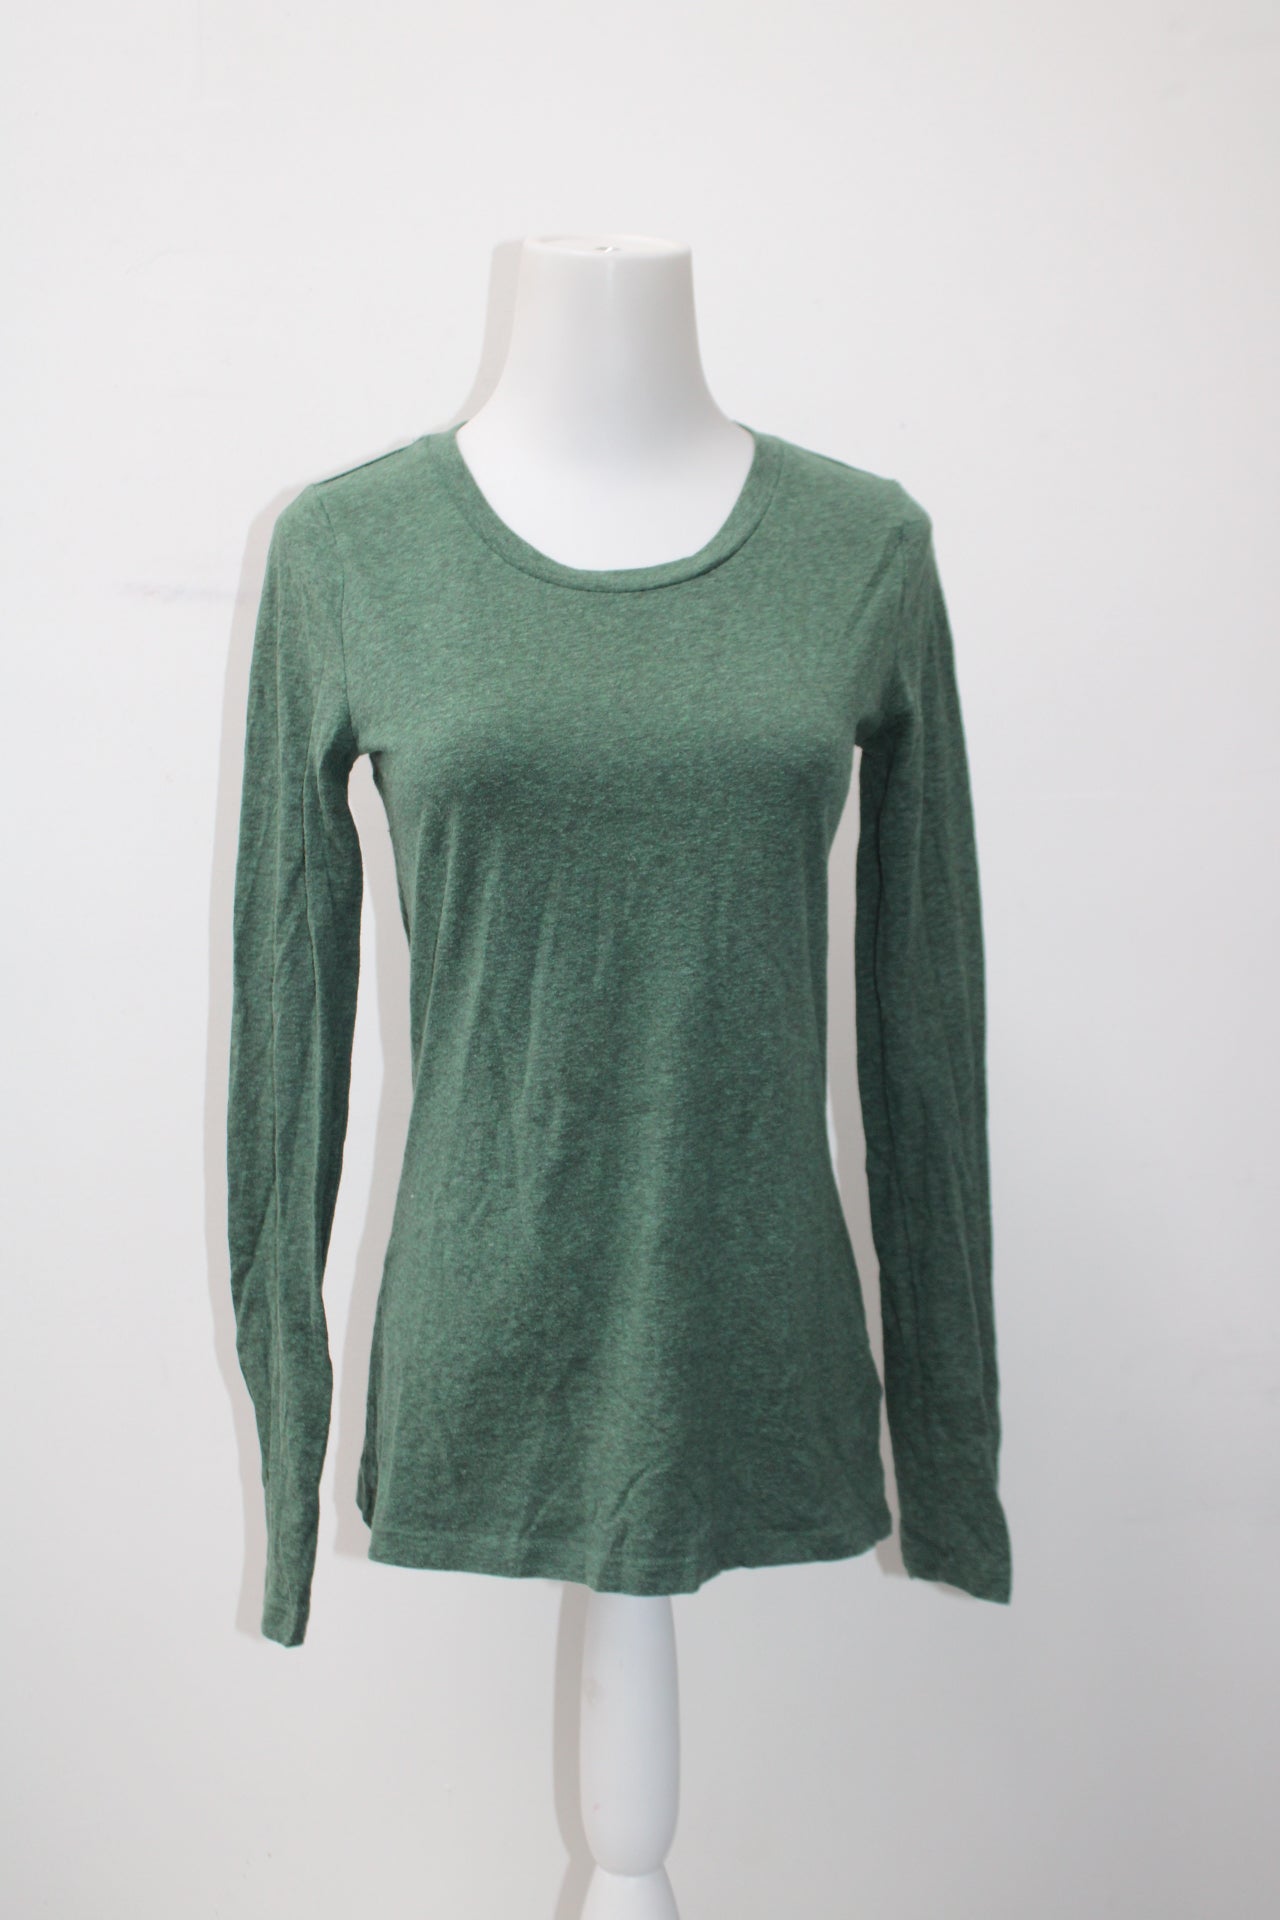 Mossimo Women's Top Green XS Pre-Owned